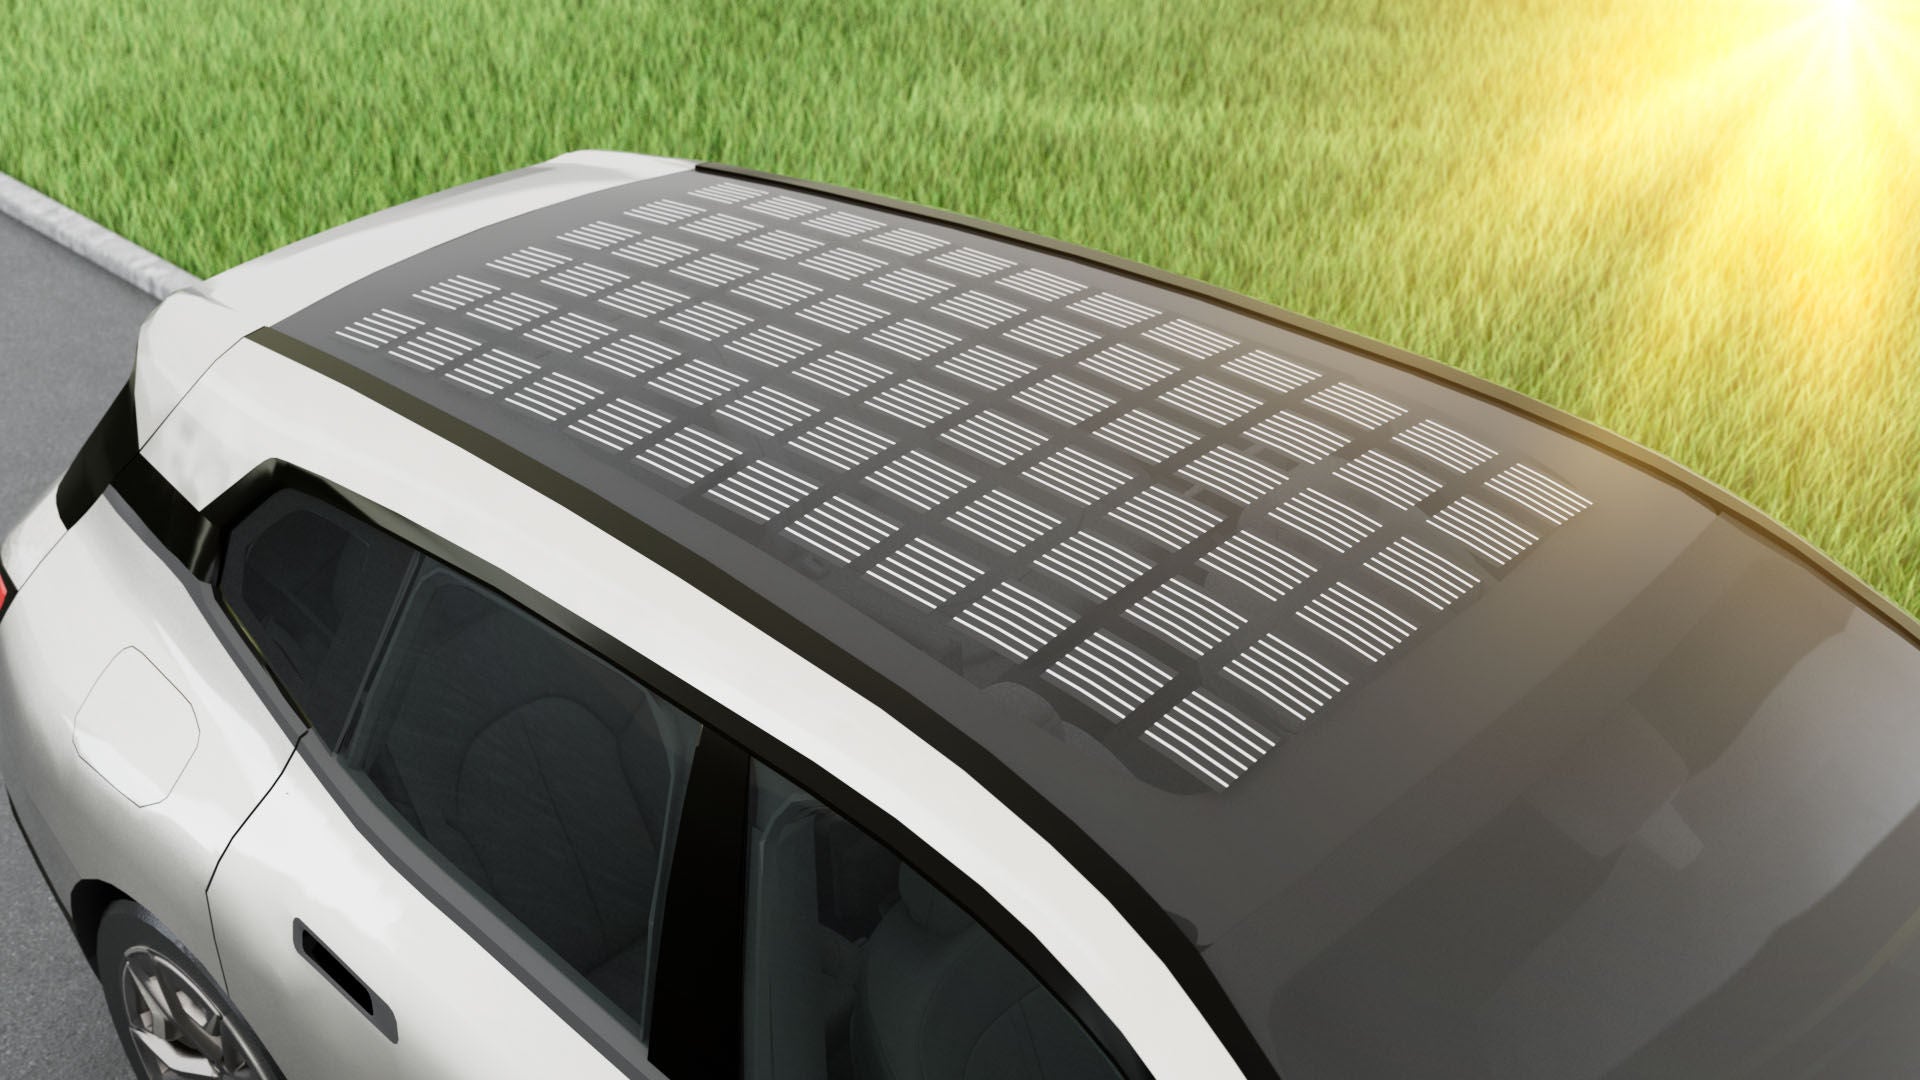 Solar cells in the glass of a passenger car roof system